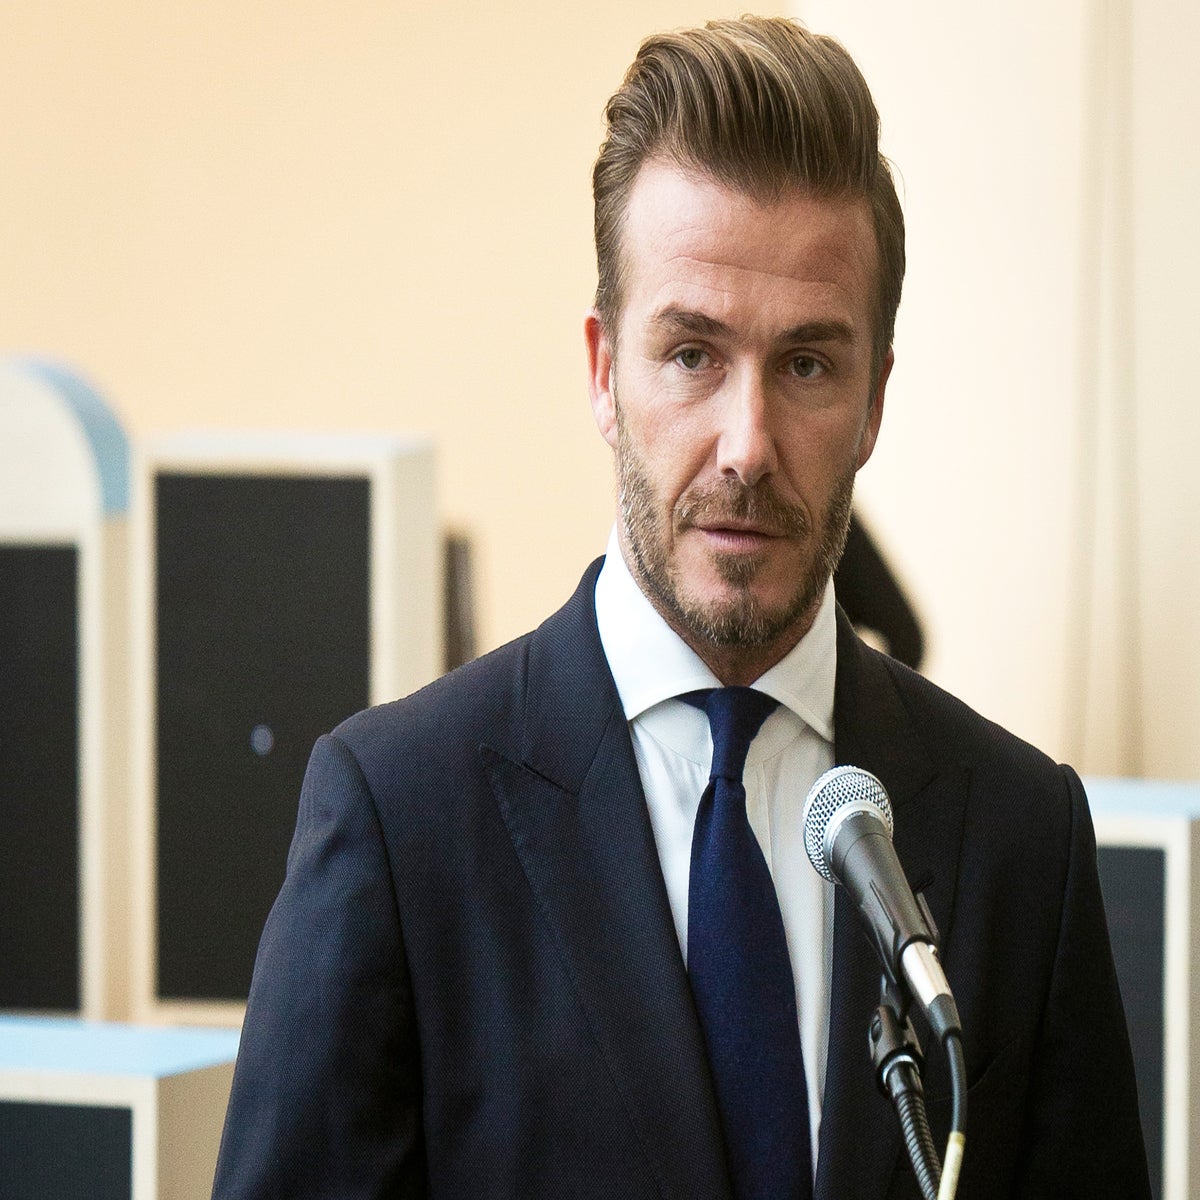 David Beckham reveals hardships he faced while at the peak of his